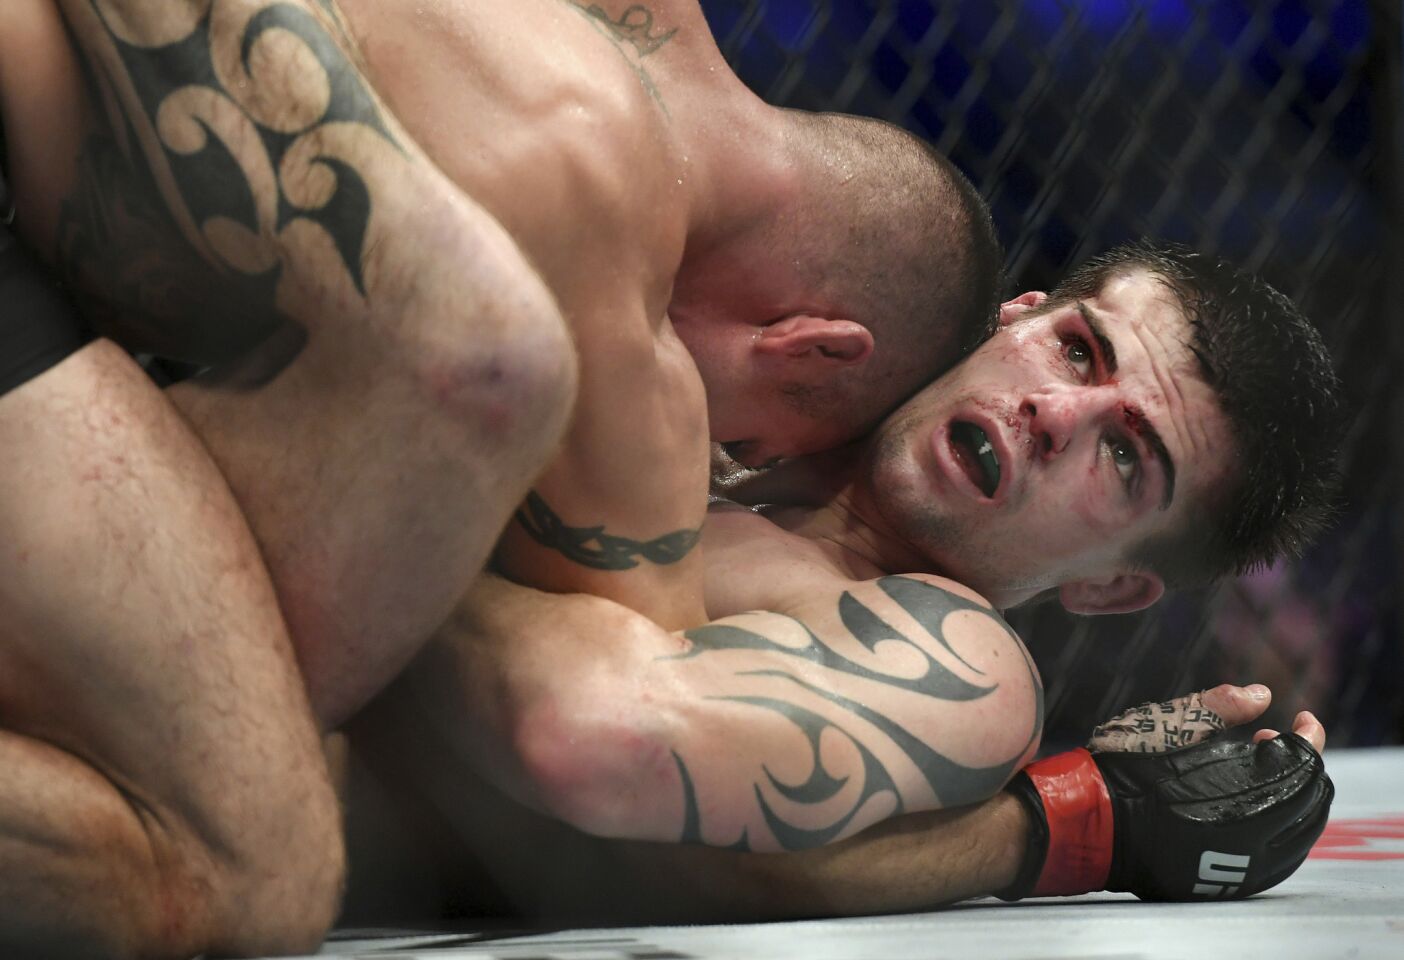 Craig White, right, is held down by Diego Sanchez during their UFC welterweight mixed martial arts bout at UFC 228 on Saturday, Sept. 8, 2018, in Dallas. (AP Photo/Jeffrey McWhorter)